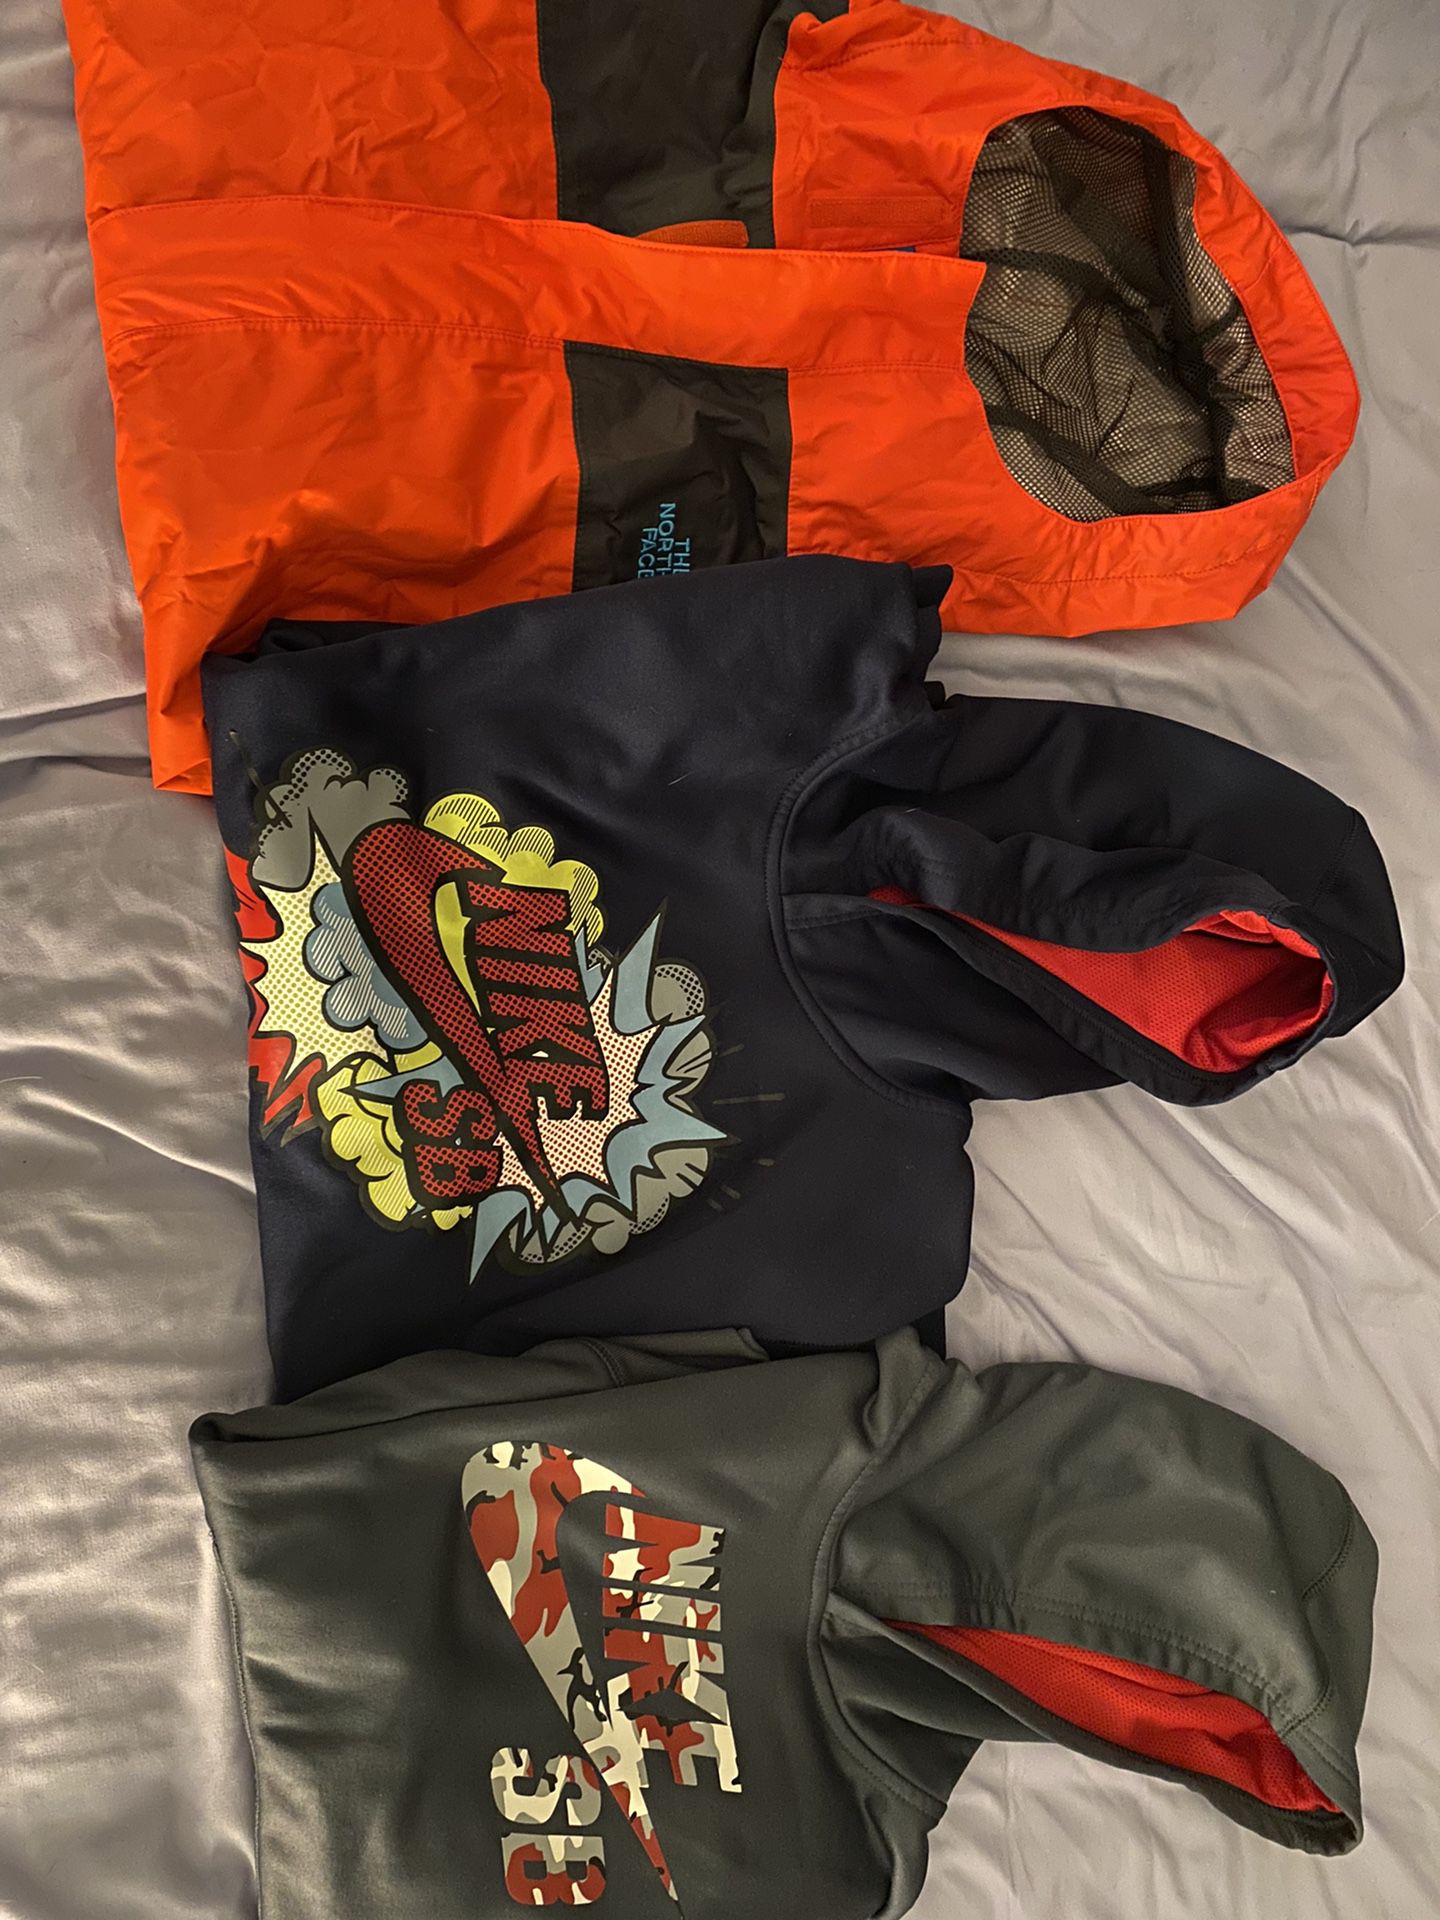 Lot Of Boys Clothes/Nike/North Face